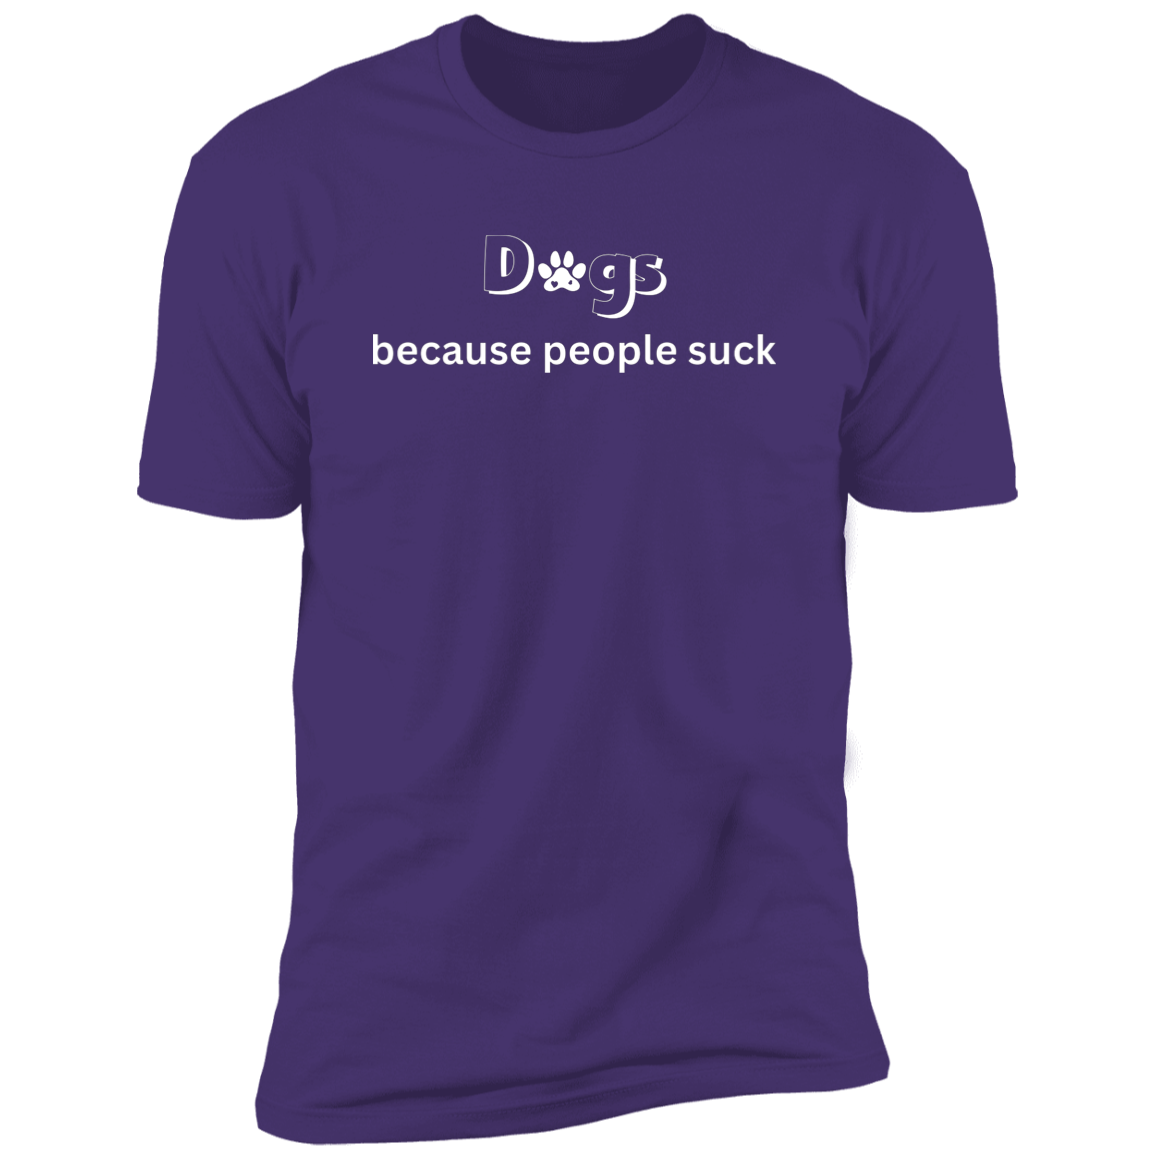 Dogs Because People Such t-shirt, funny dog shirt for humans, in purple rush